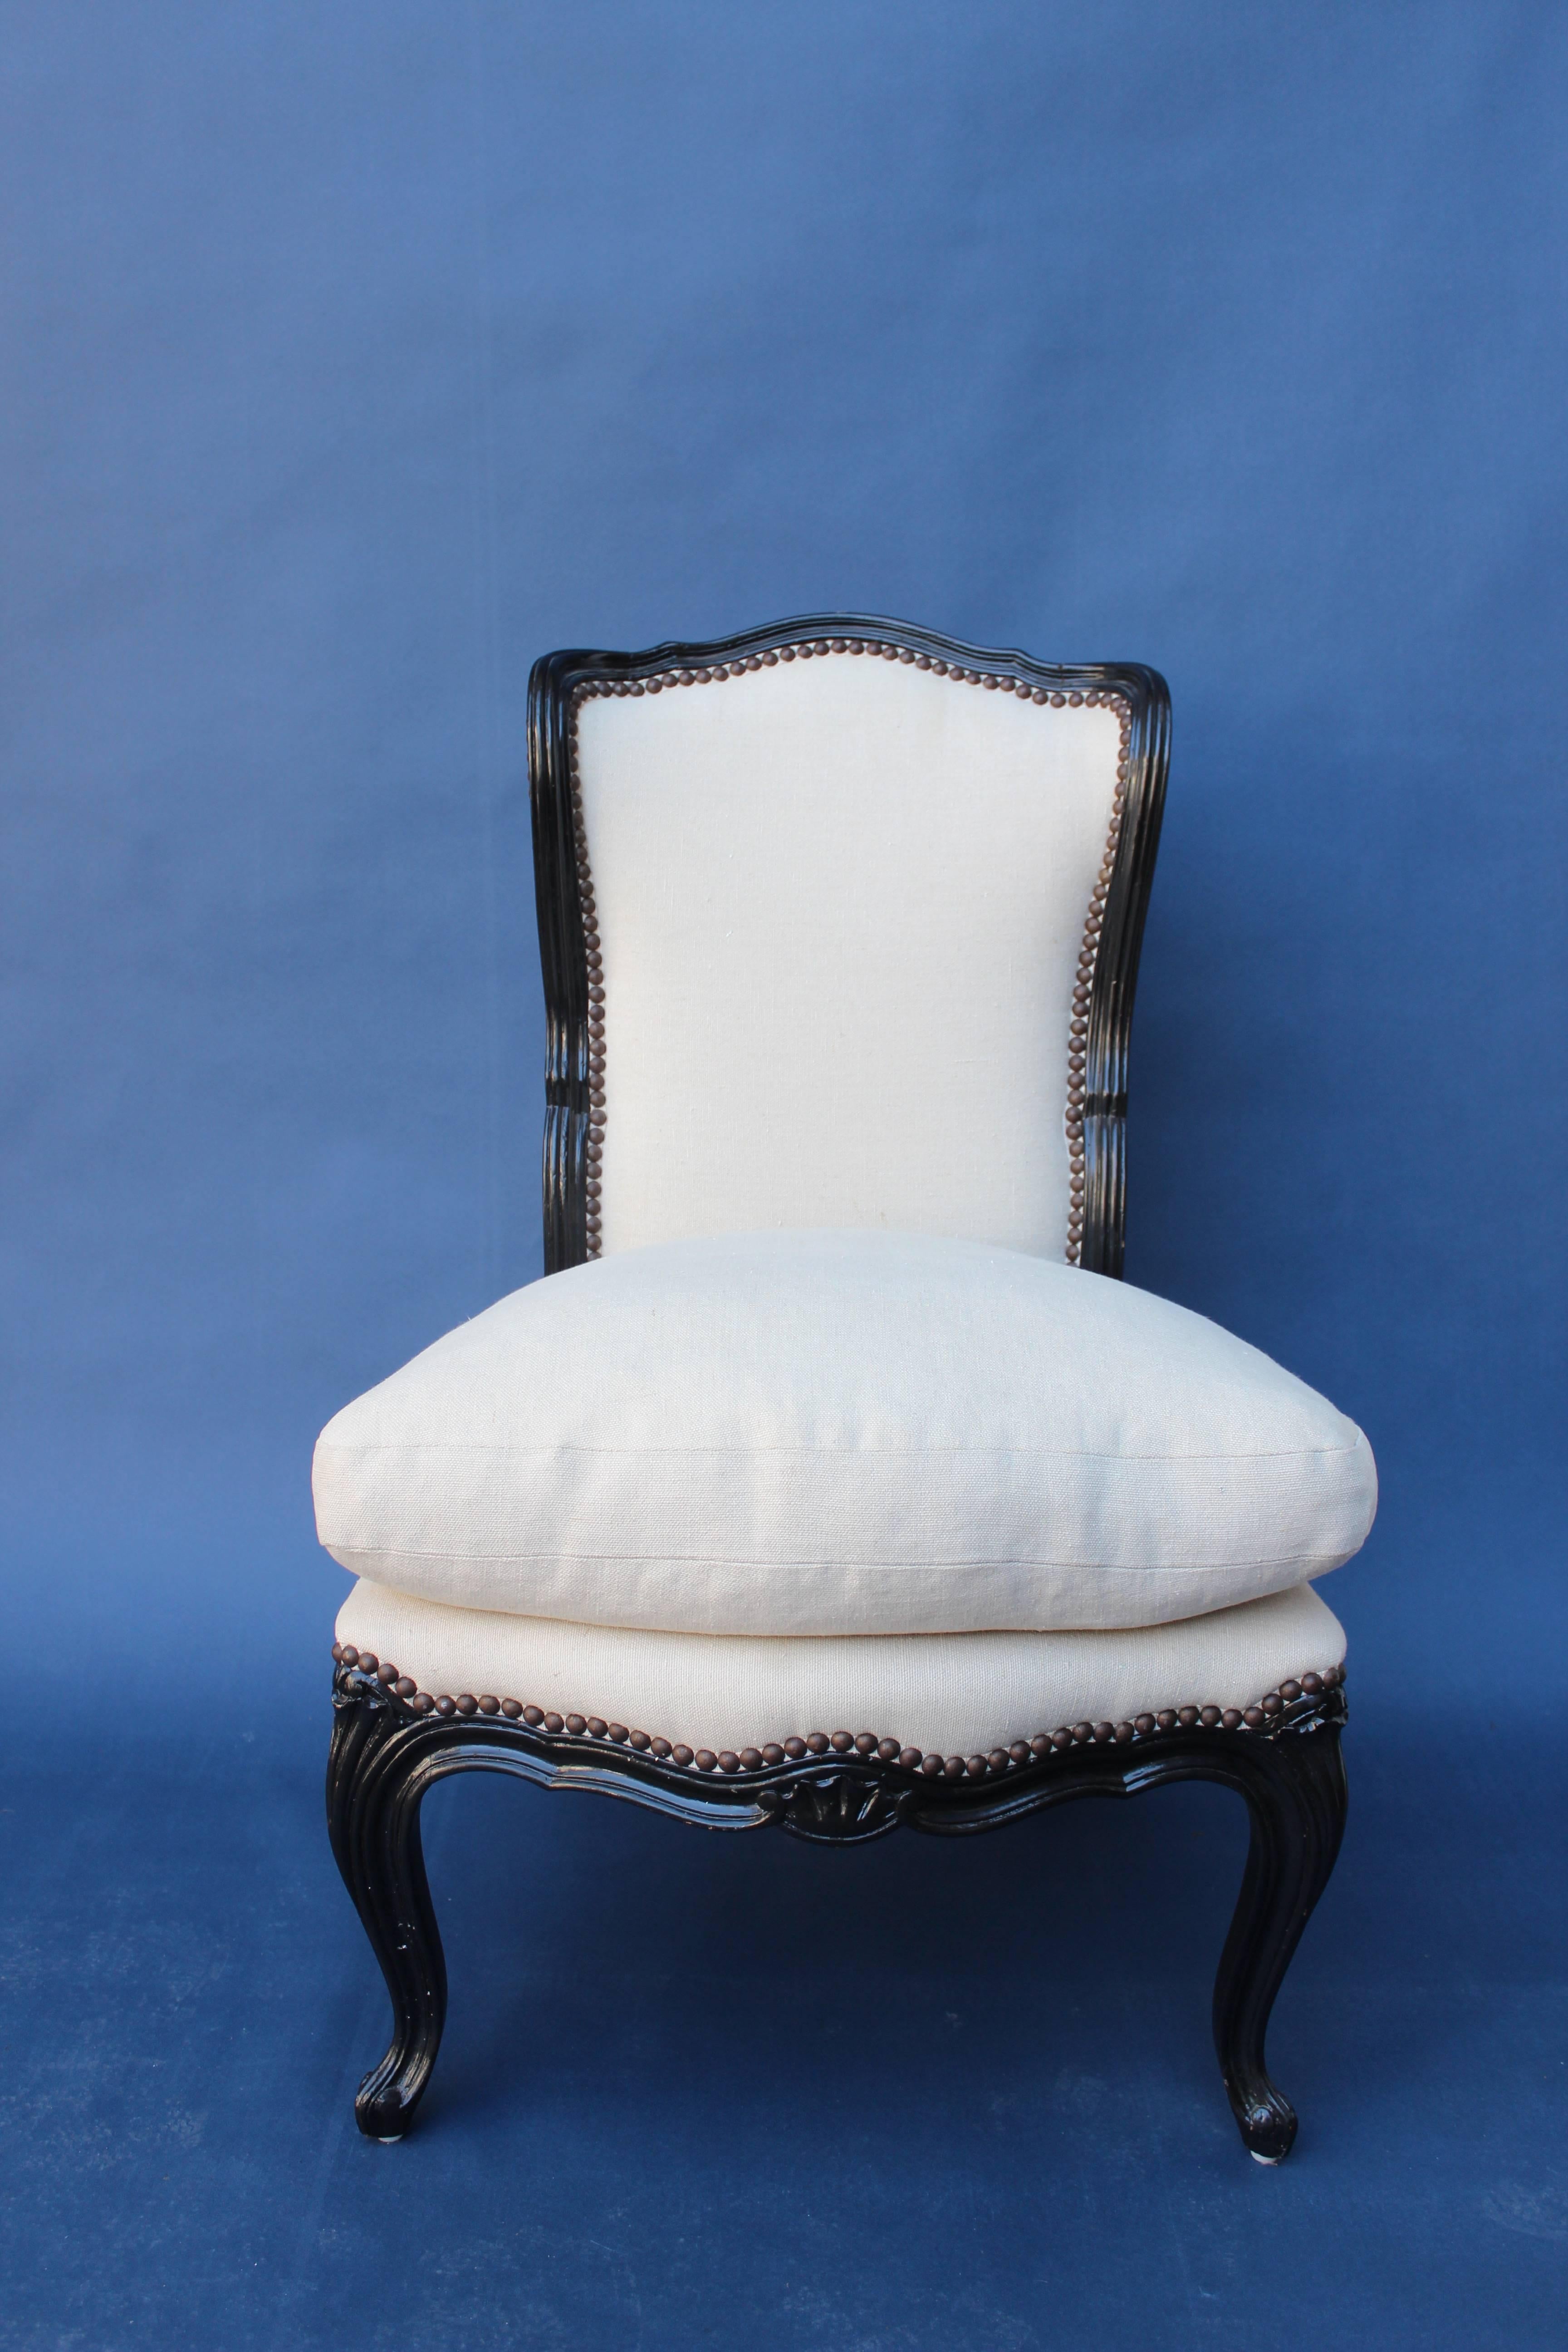 Petit French slipper chair with black painted frame newly reupholstered in linen with all new materials and plump down seat.